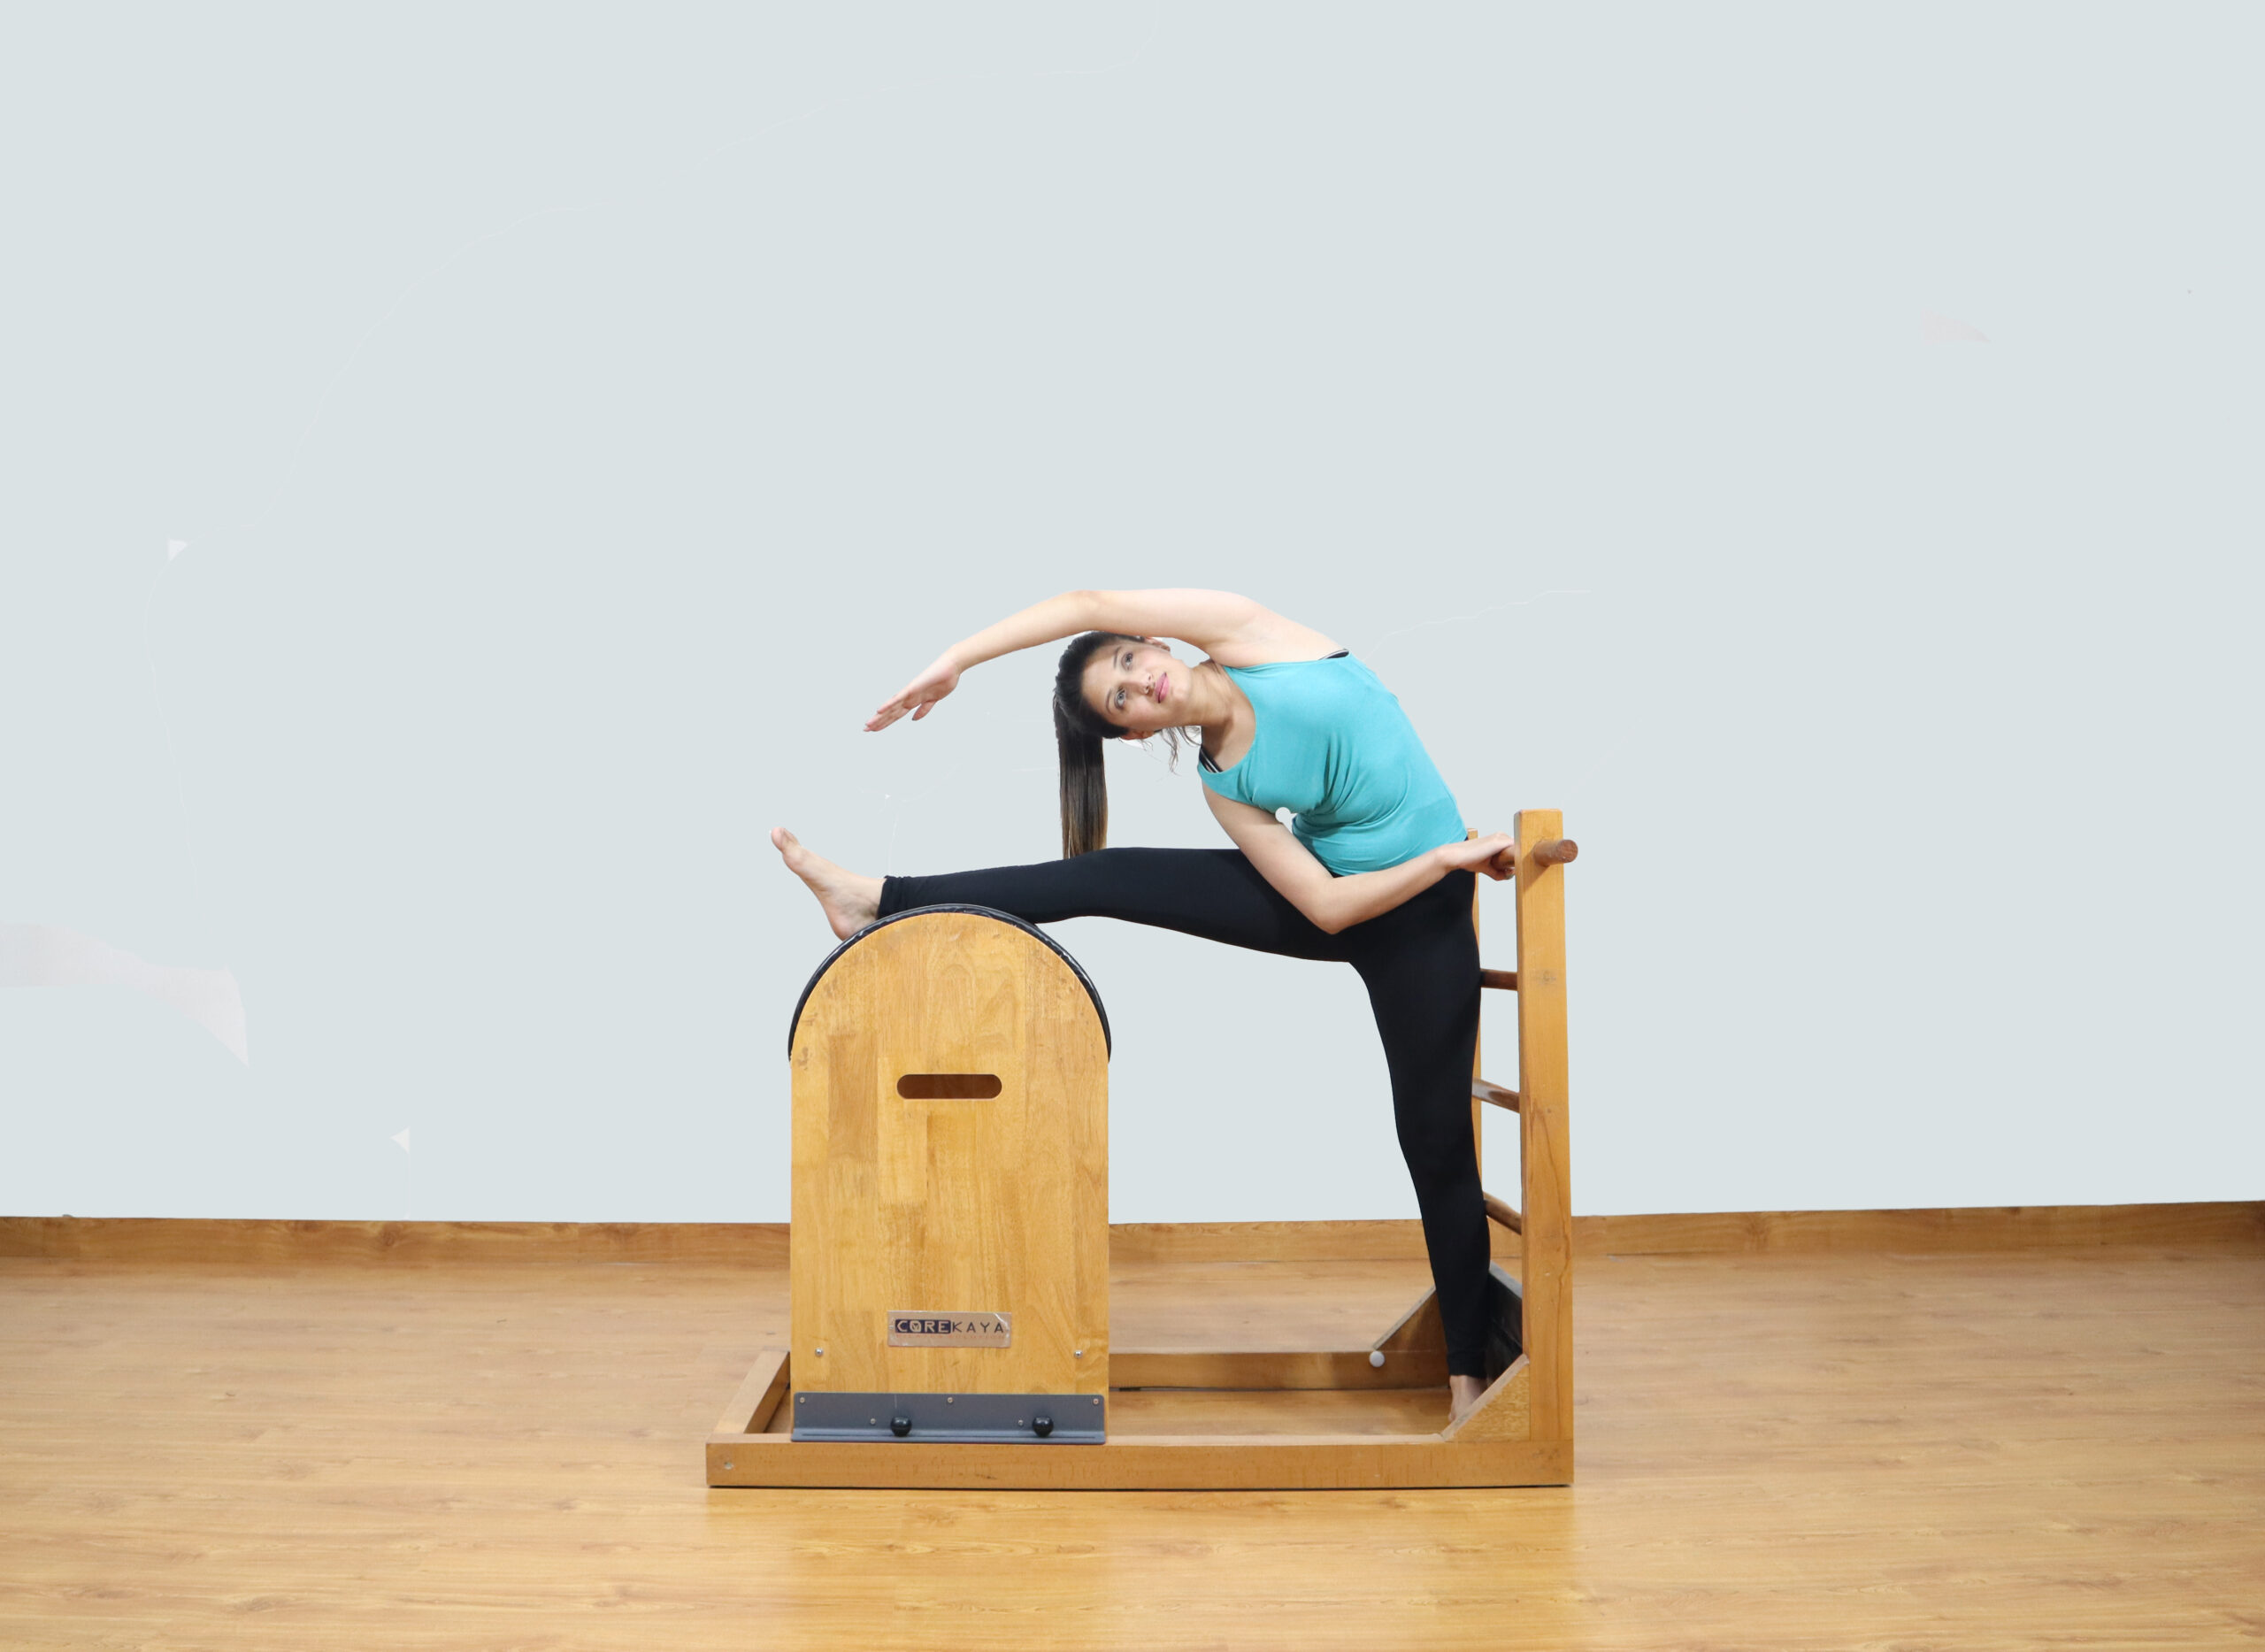 Professional pilates ladder For Workouts 